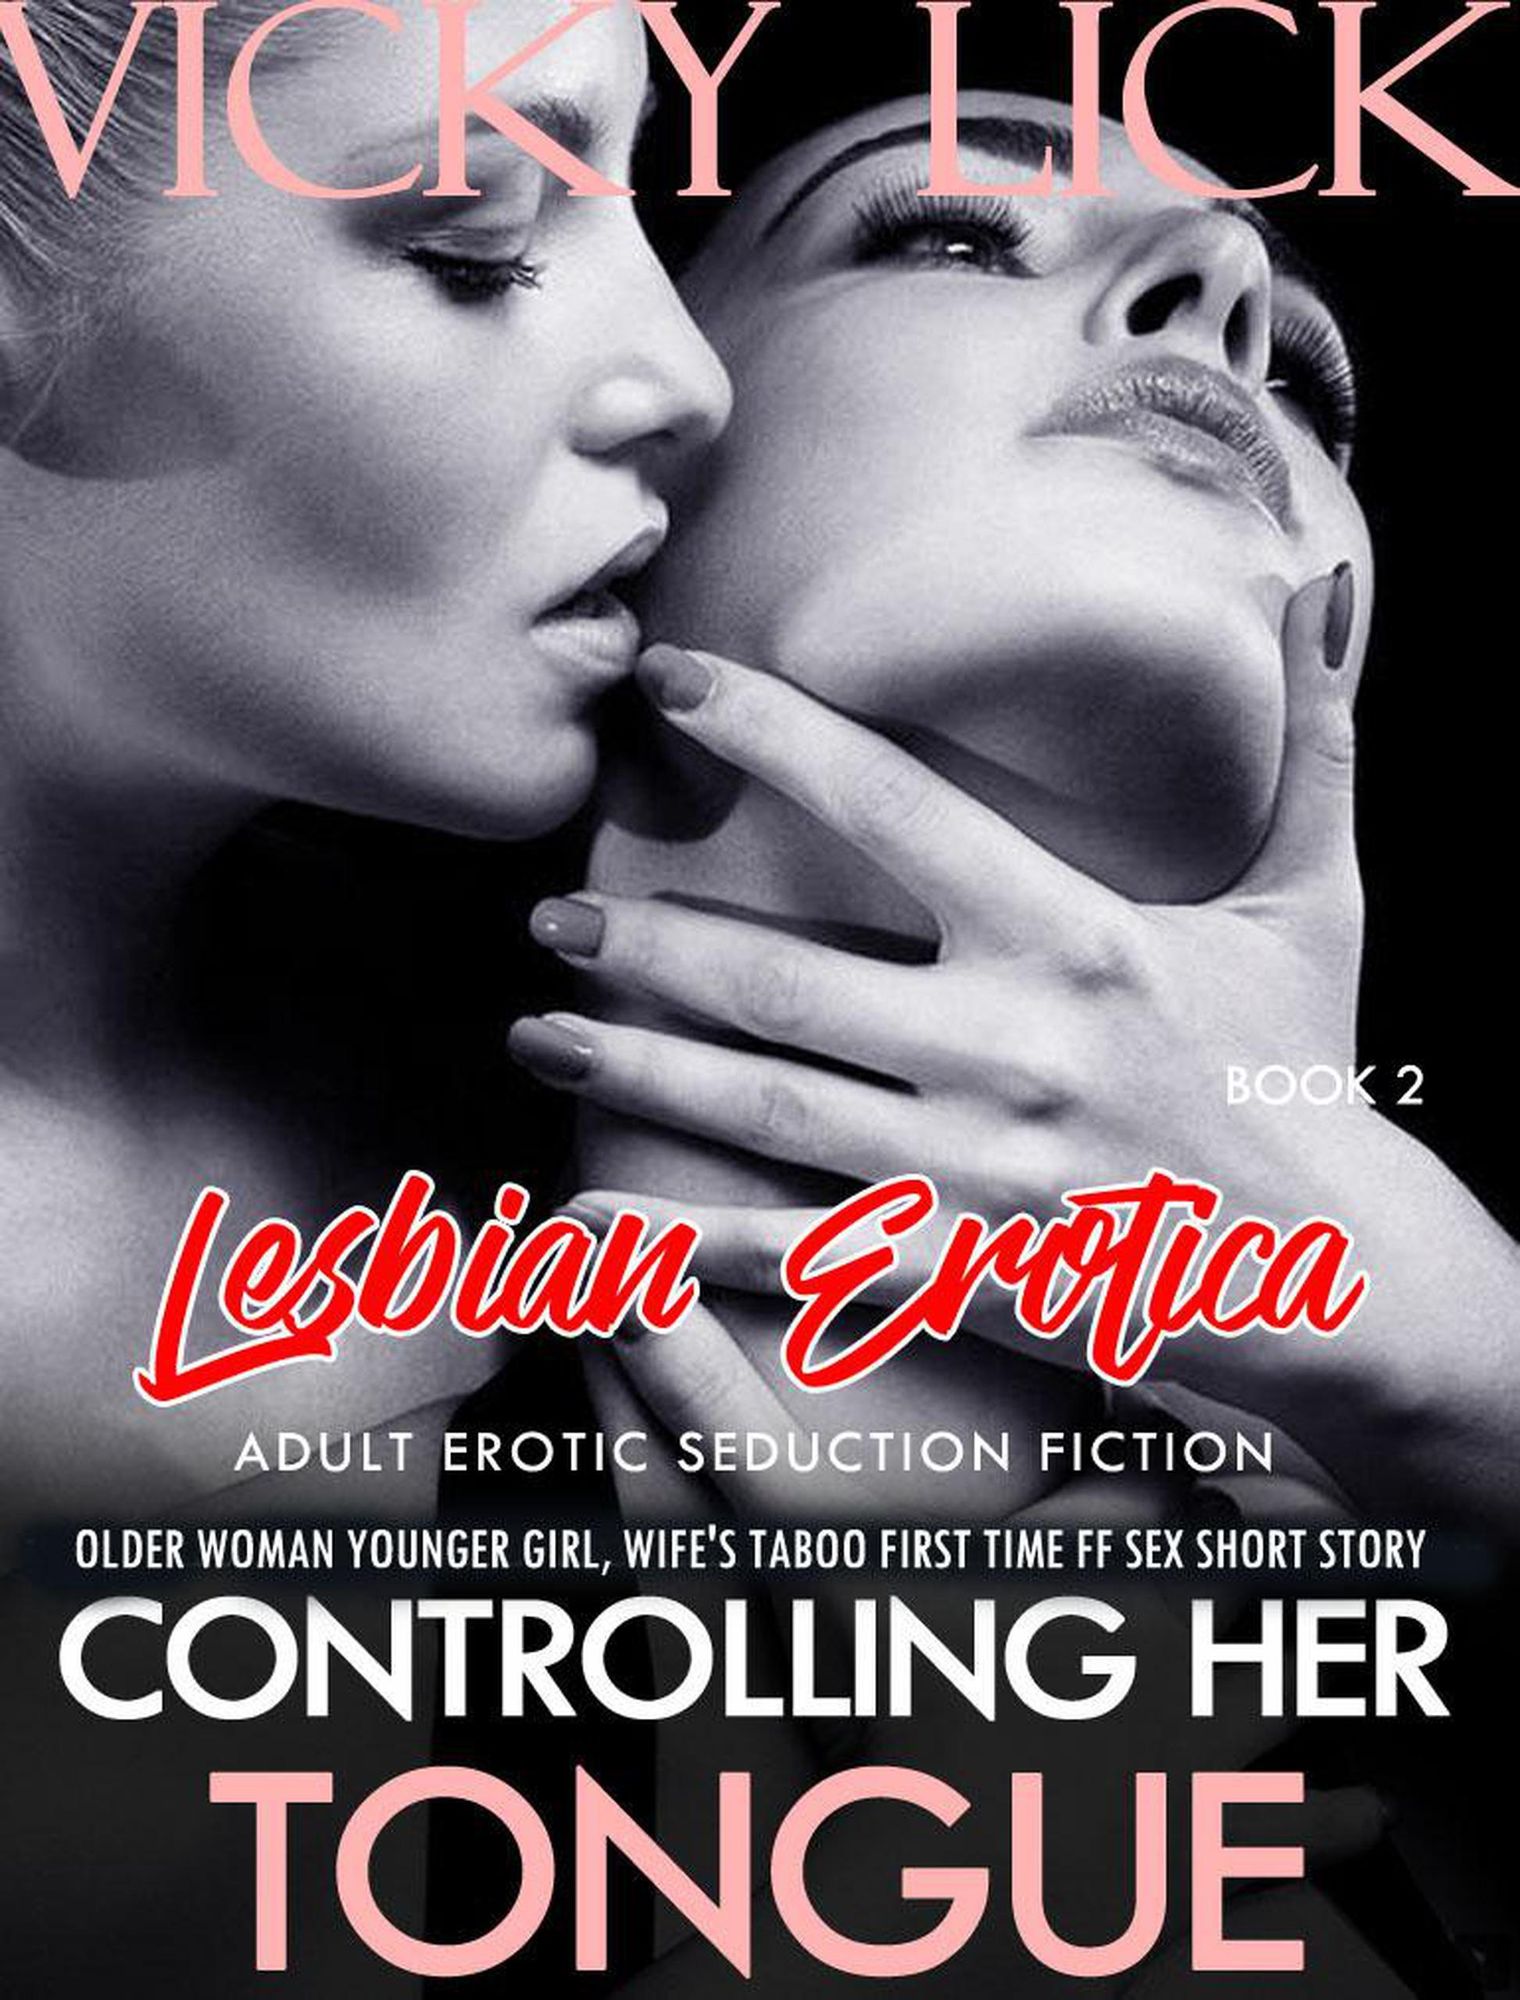 Lesbian Erotica Controlling Her Tongue - Older Woman Younger Girl, Wifes Taboo First Time FF Sex Short Story (Adult Erotic Seduction Fiction, #2) von Vicky Lick photo